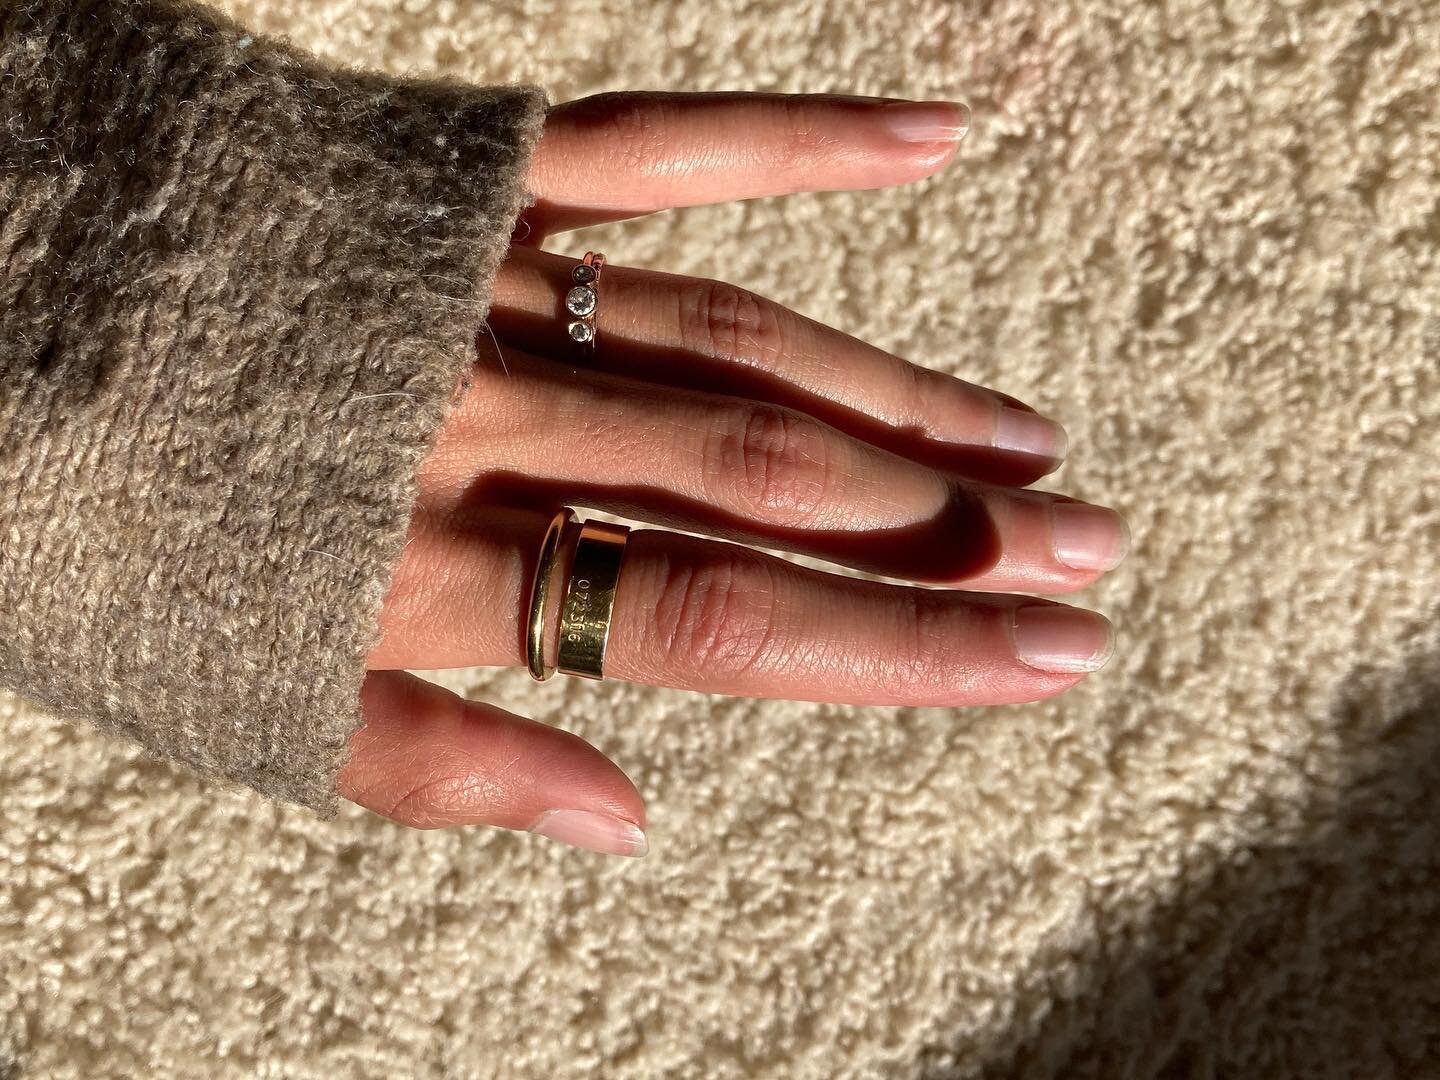 Golden rings in golden light. 
@itsgldn is having their ONLY sale of the year right now through November 21st! 15% off orders up to $150 (excluding solid gold!) 
⠀⠀⠀⠀⠀⠀⠀⠀⠀
So you can get stunning and personalized jewelry pieces for yourself or to gif